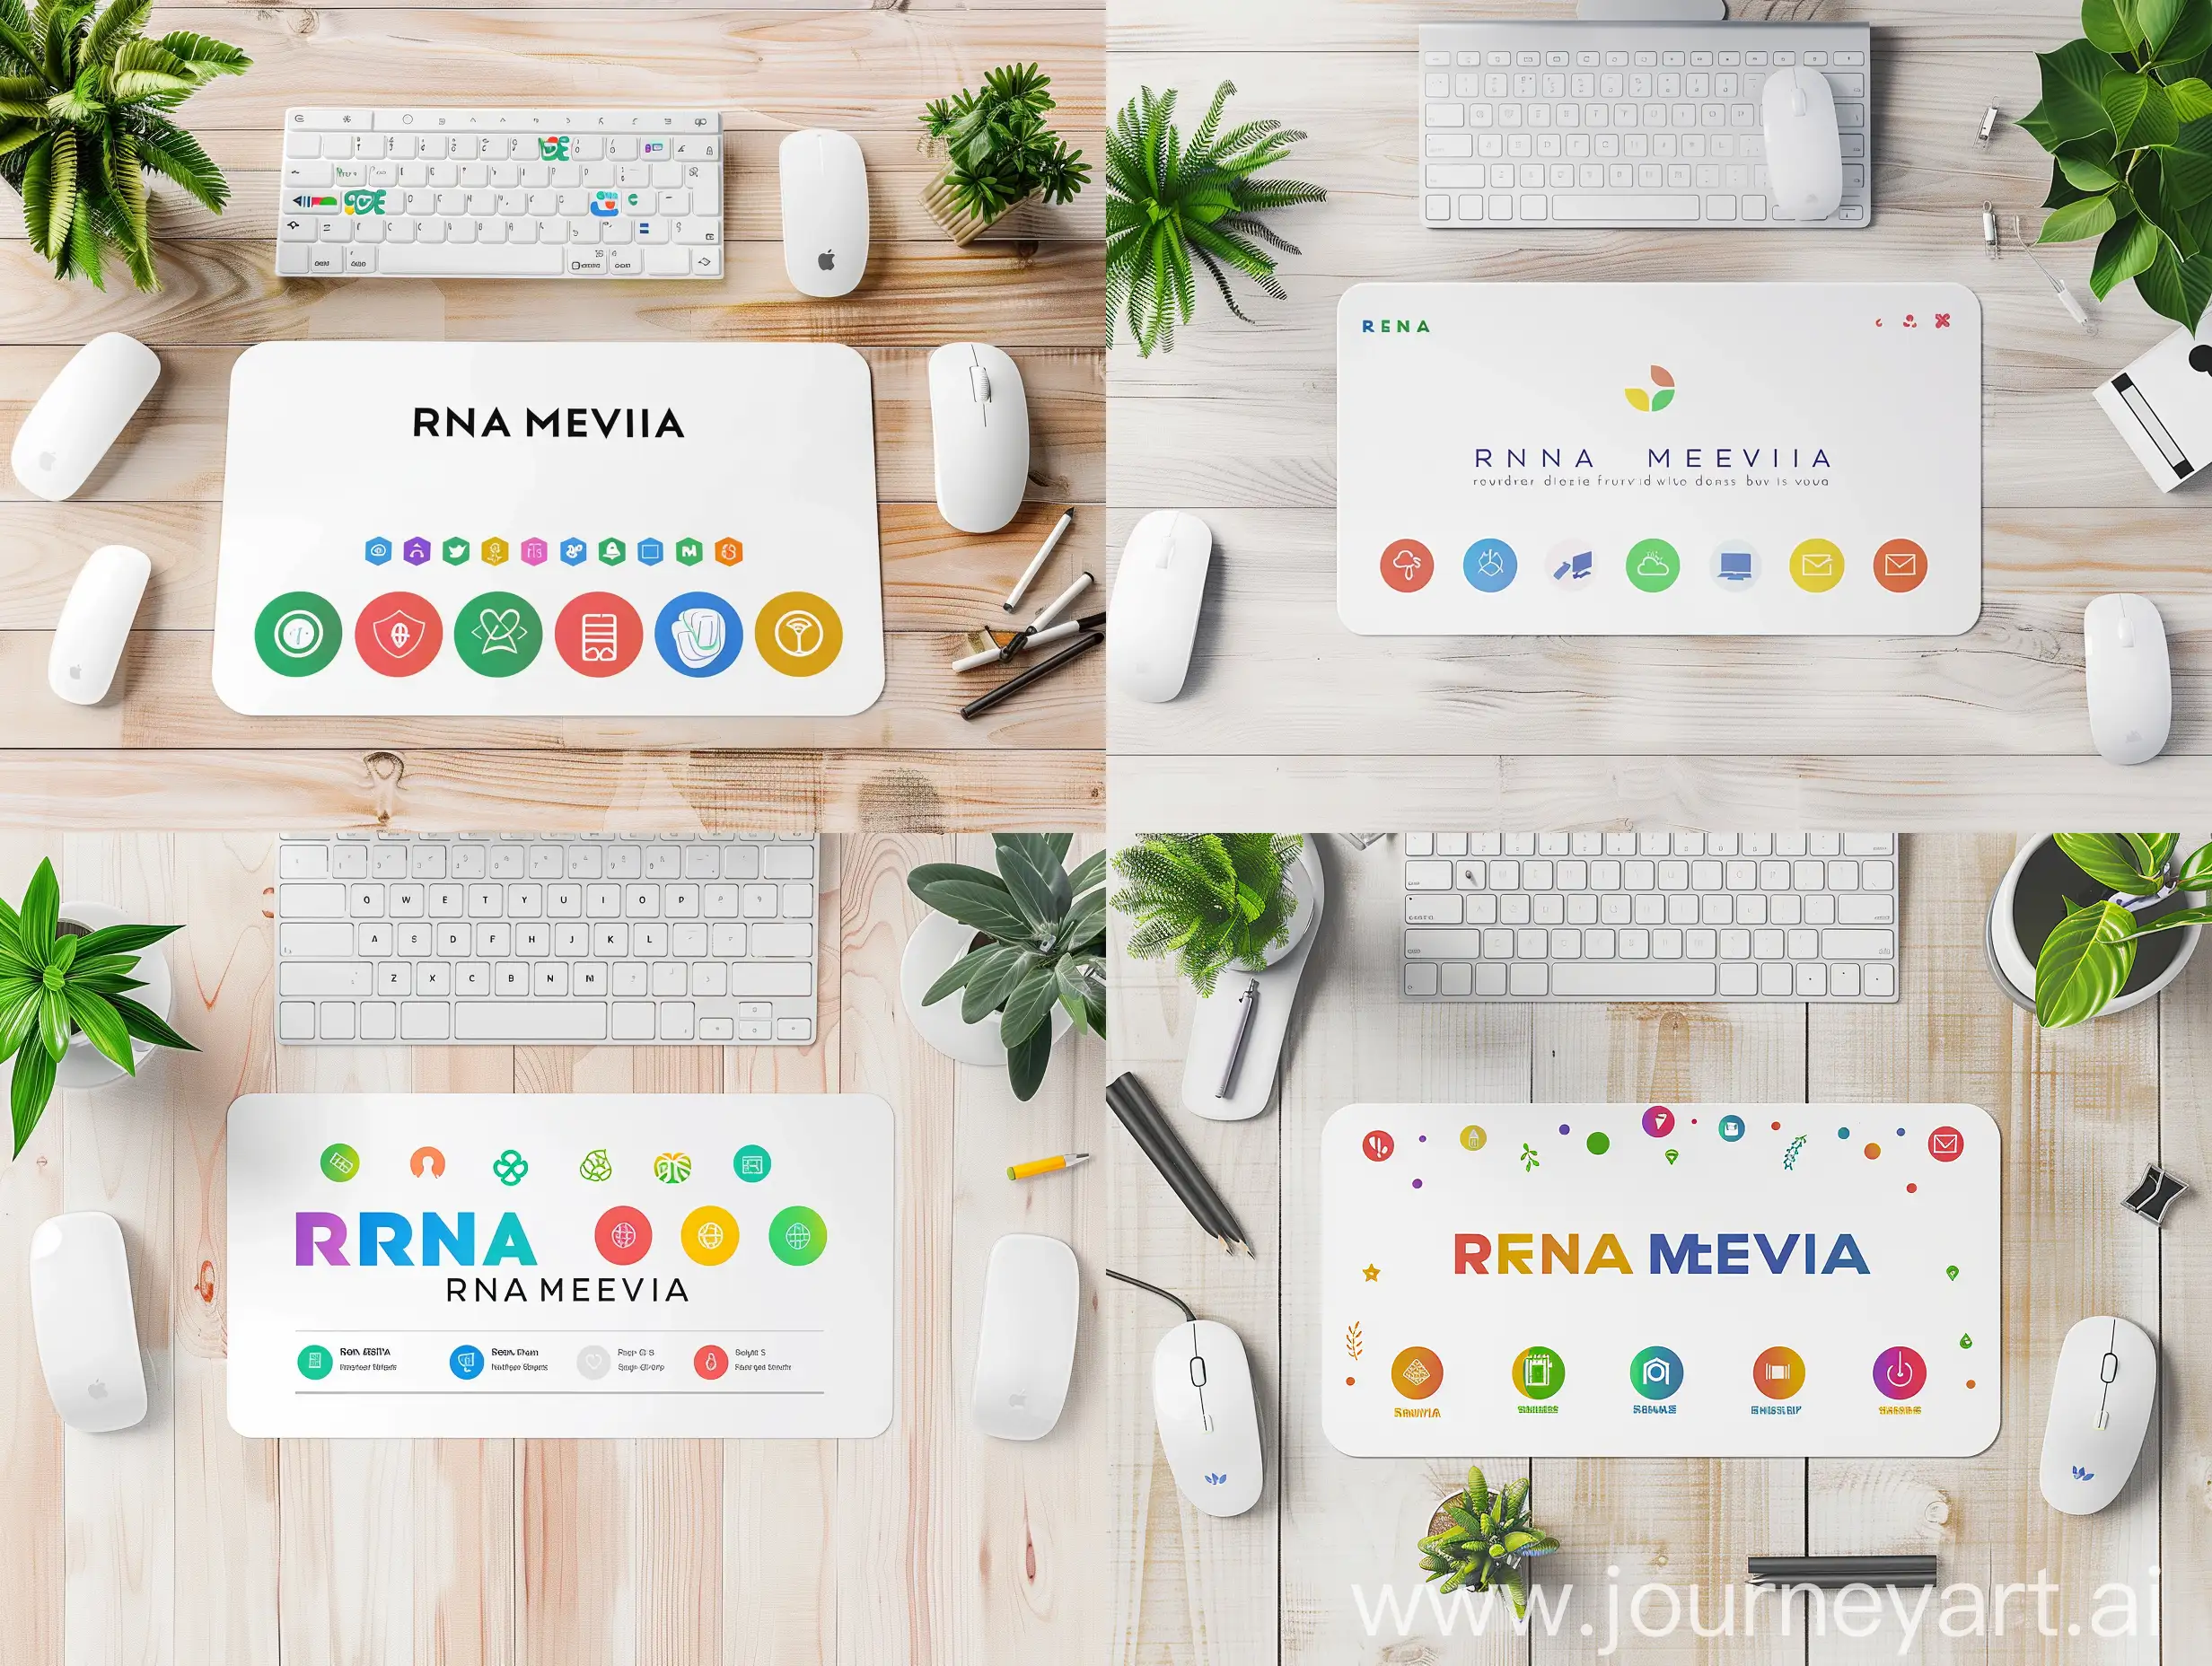 Customizable-Desk-Mat-RENA-MEVIA-with-Colorful-Icons-and-Office-Accessories